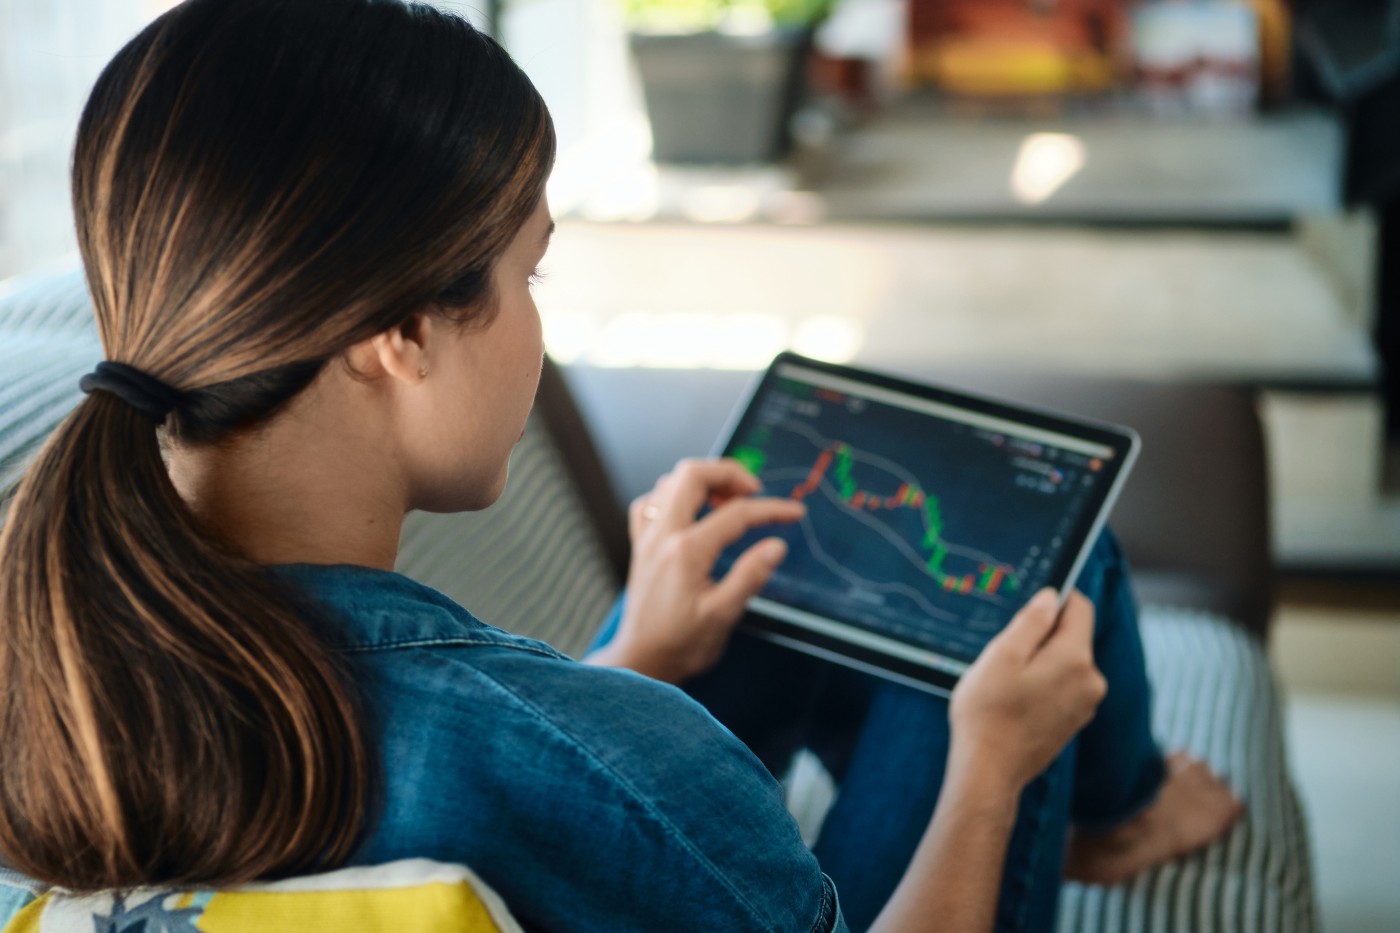 https://tickertapecdn.tdameritrade.com/assets/images/pages/md/Woman trading on a tablet: Preferred stock